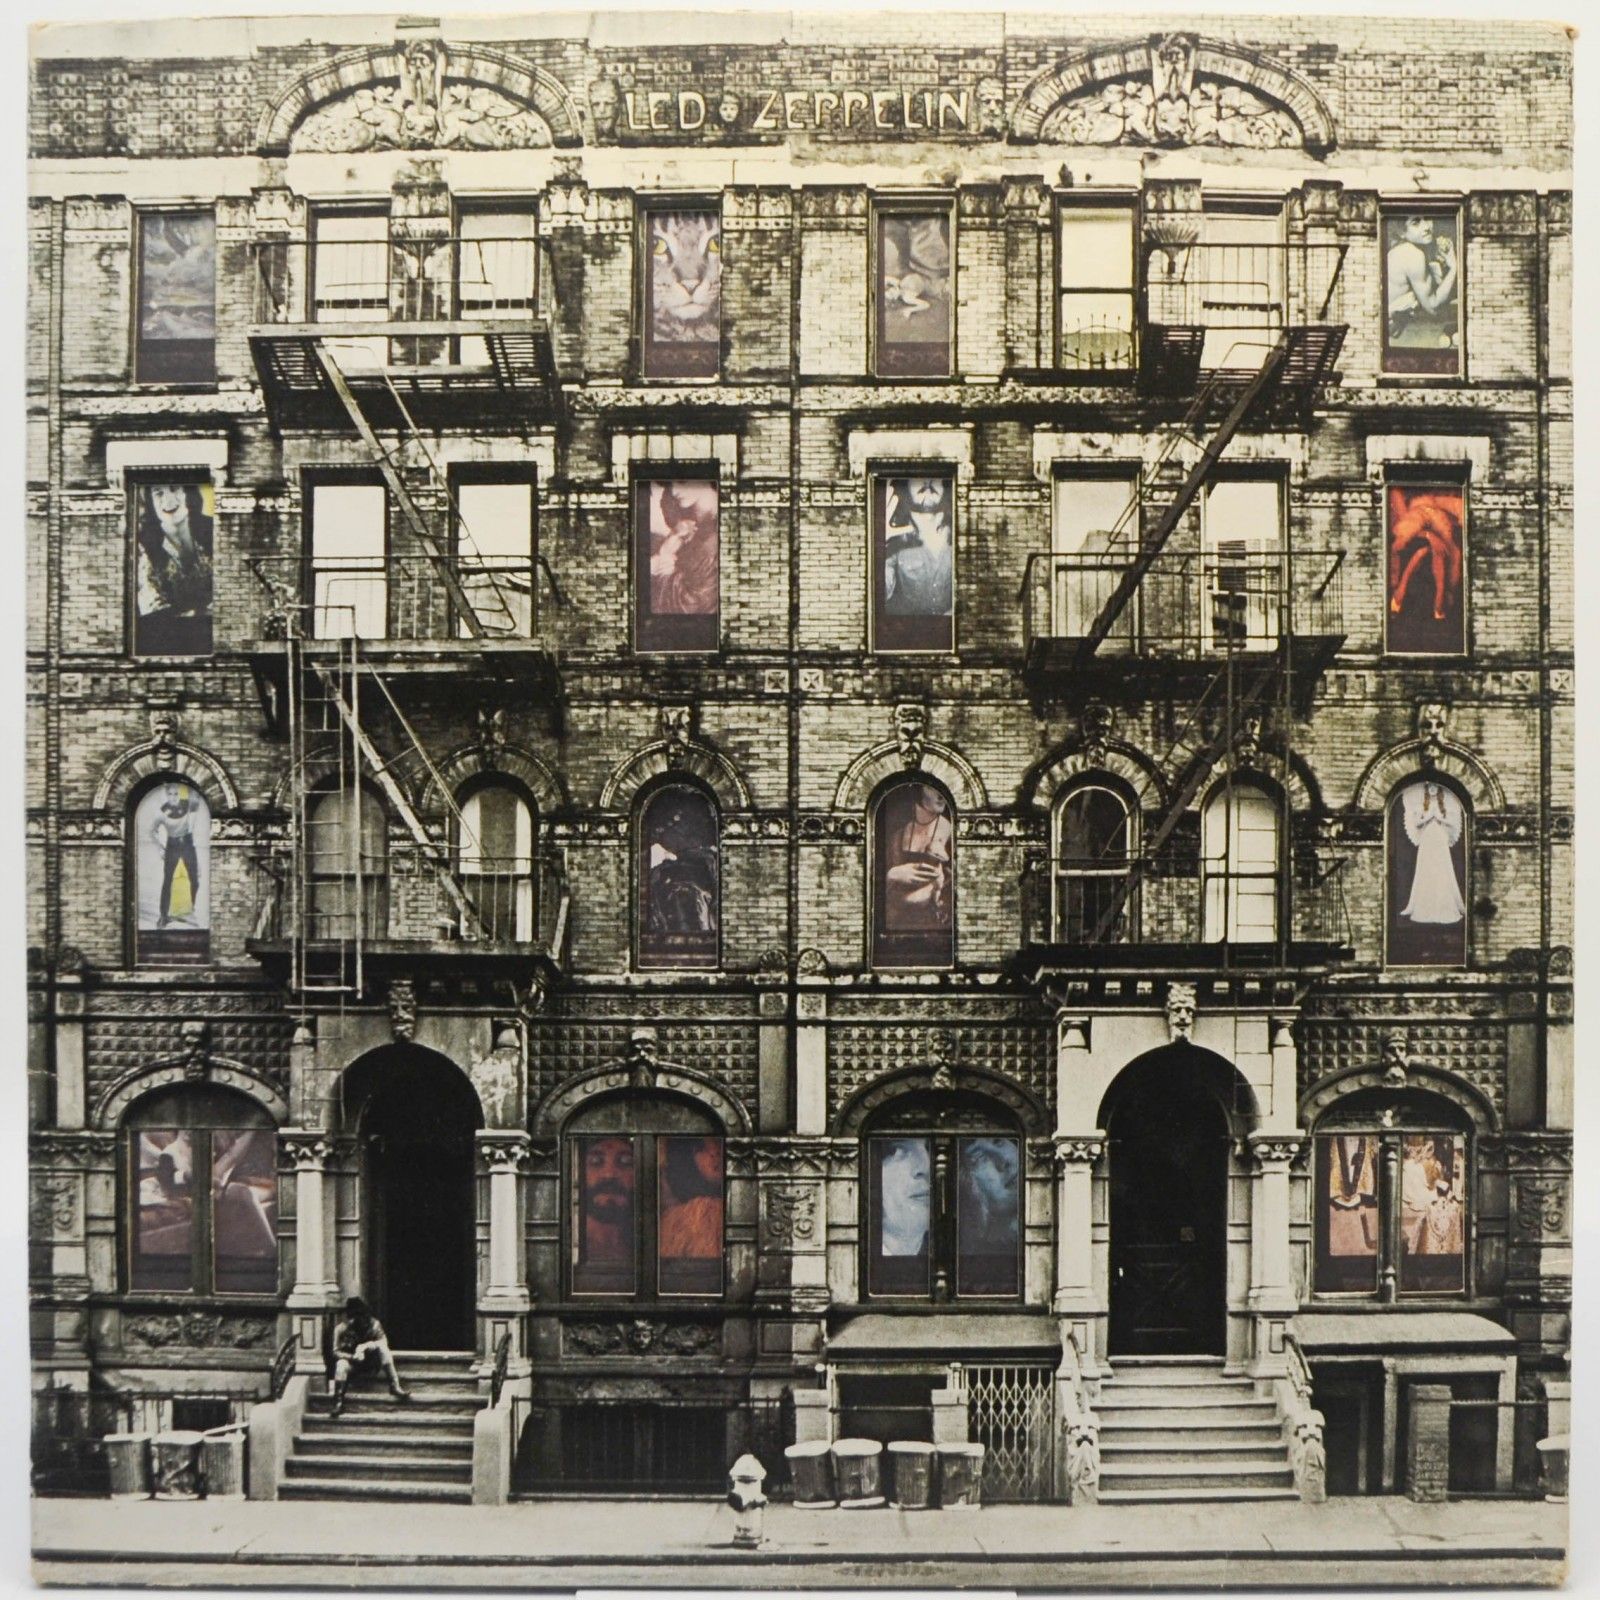 Led zeppelin physical. Лед Зеппелин physical Graffiti. Led Zeppelin - physical Graffiti (1975) LP. Led Zeppelin альбом physical Graffiti. CD led Zeppelin - physical Graffiti 1975.